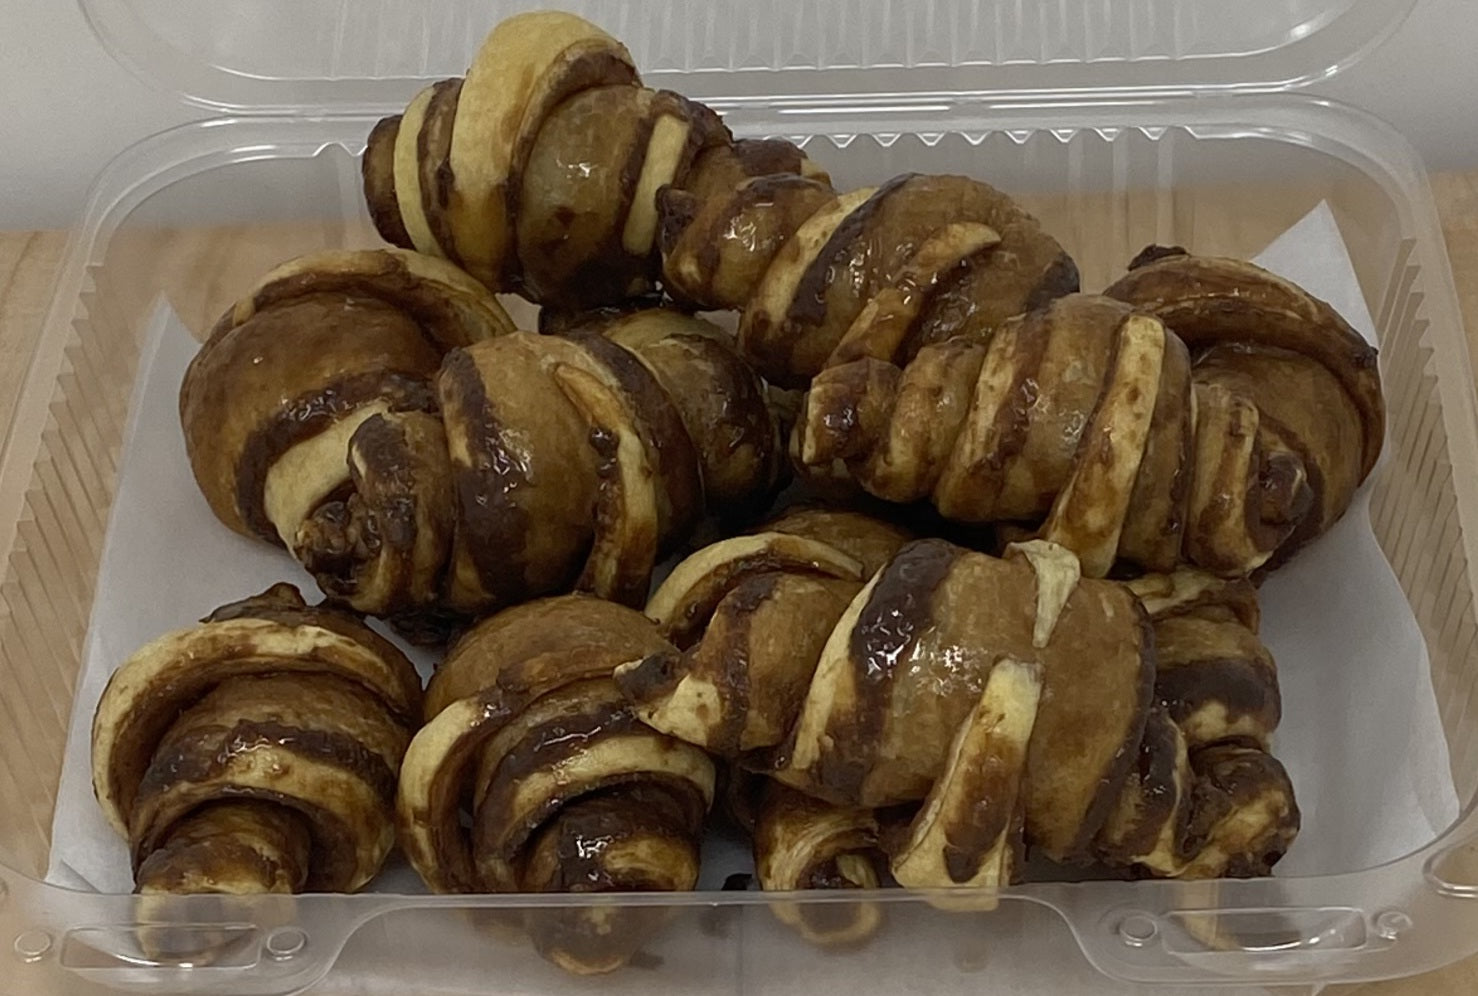 A tasty puff pastry rolled around a chocolate like filling. 